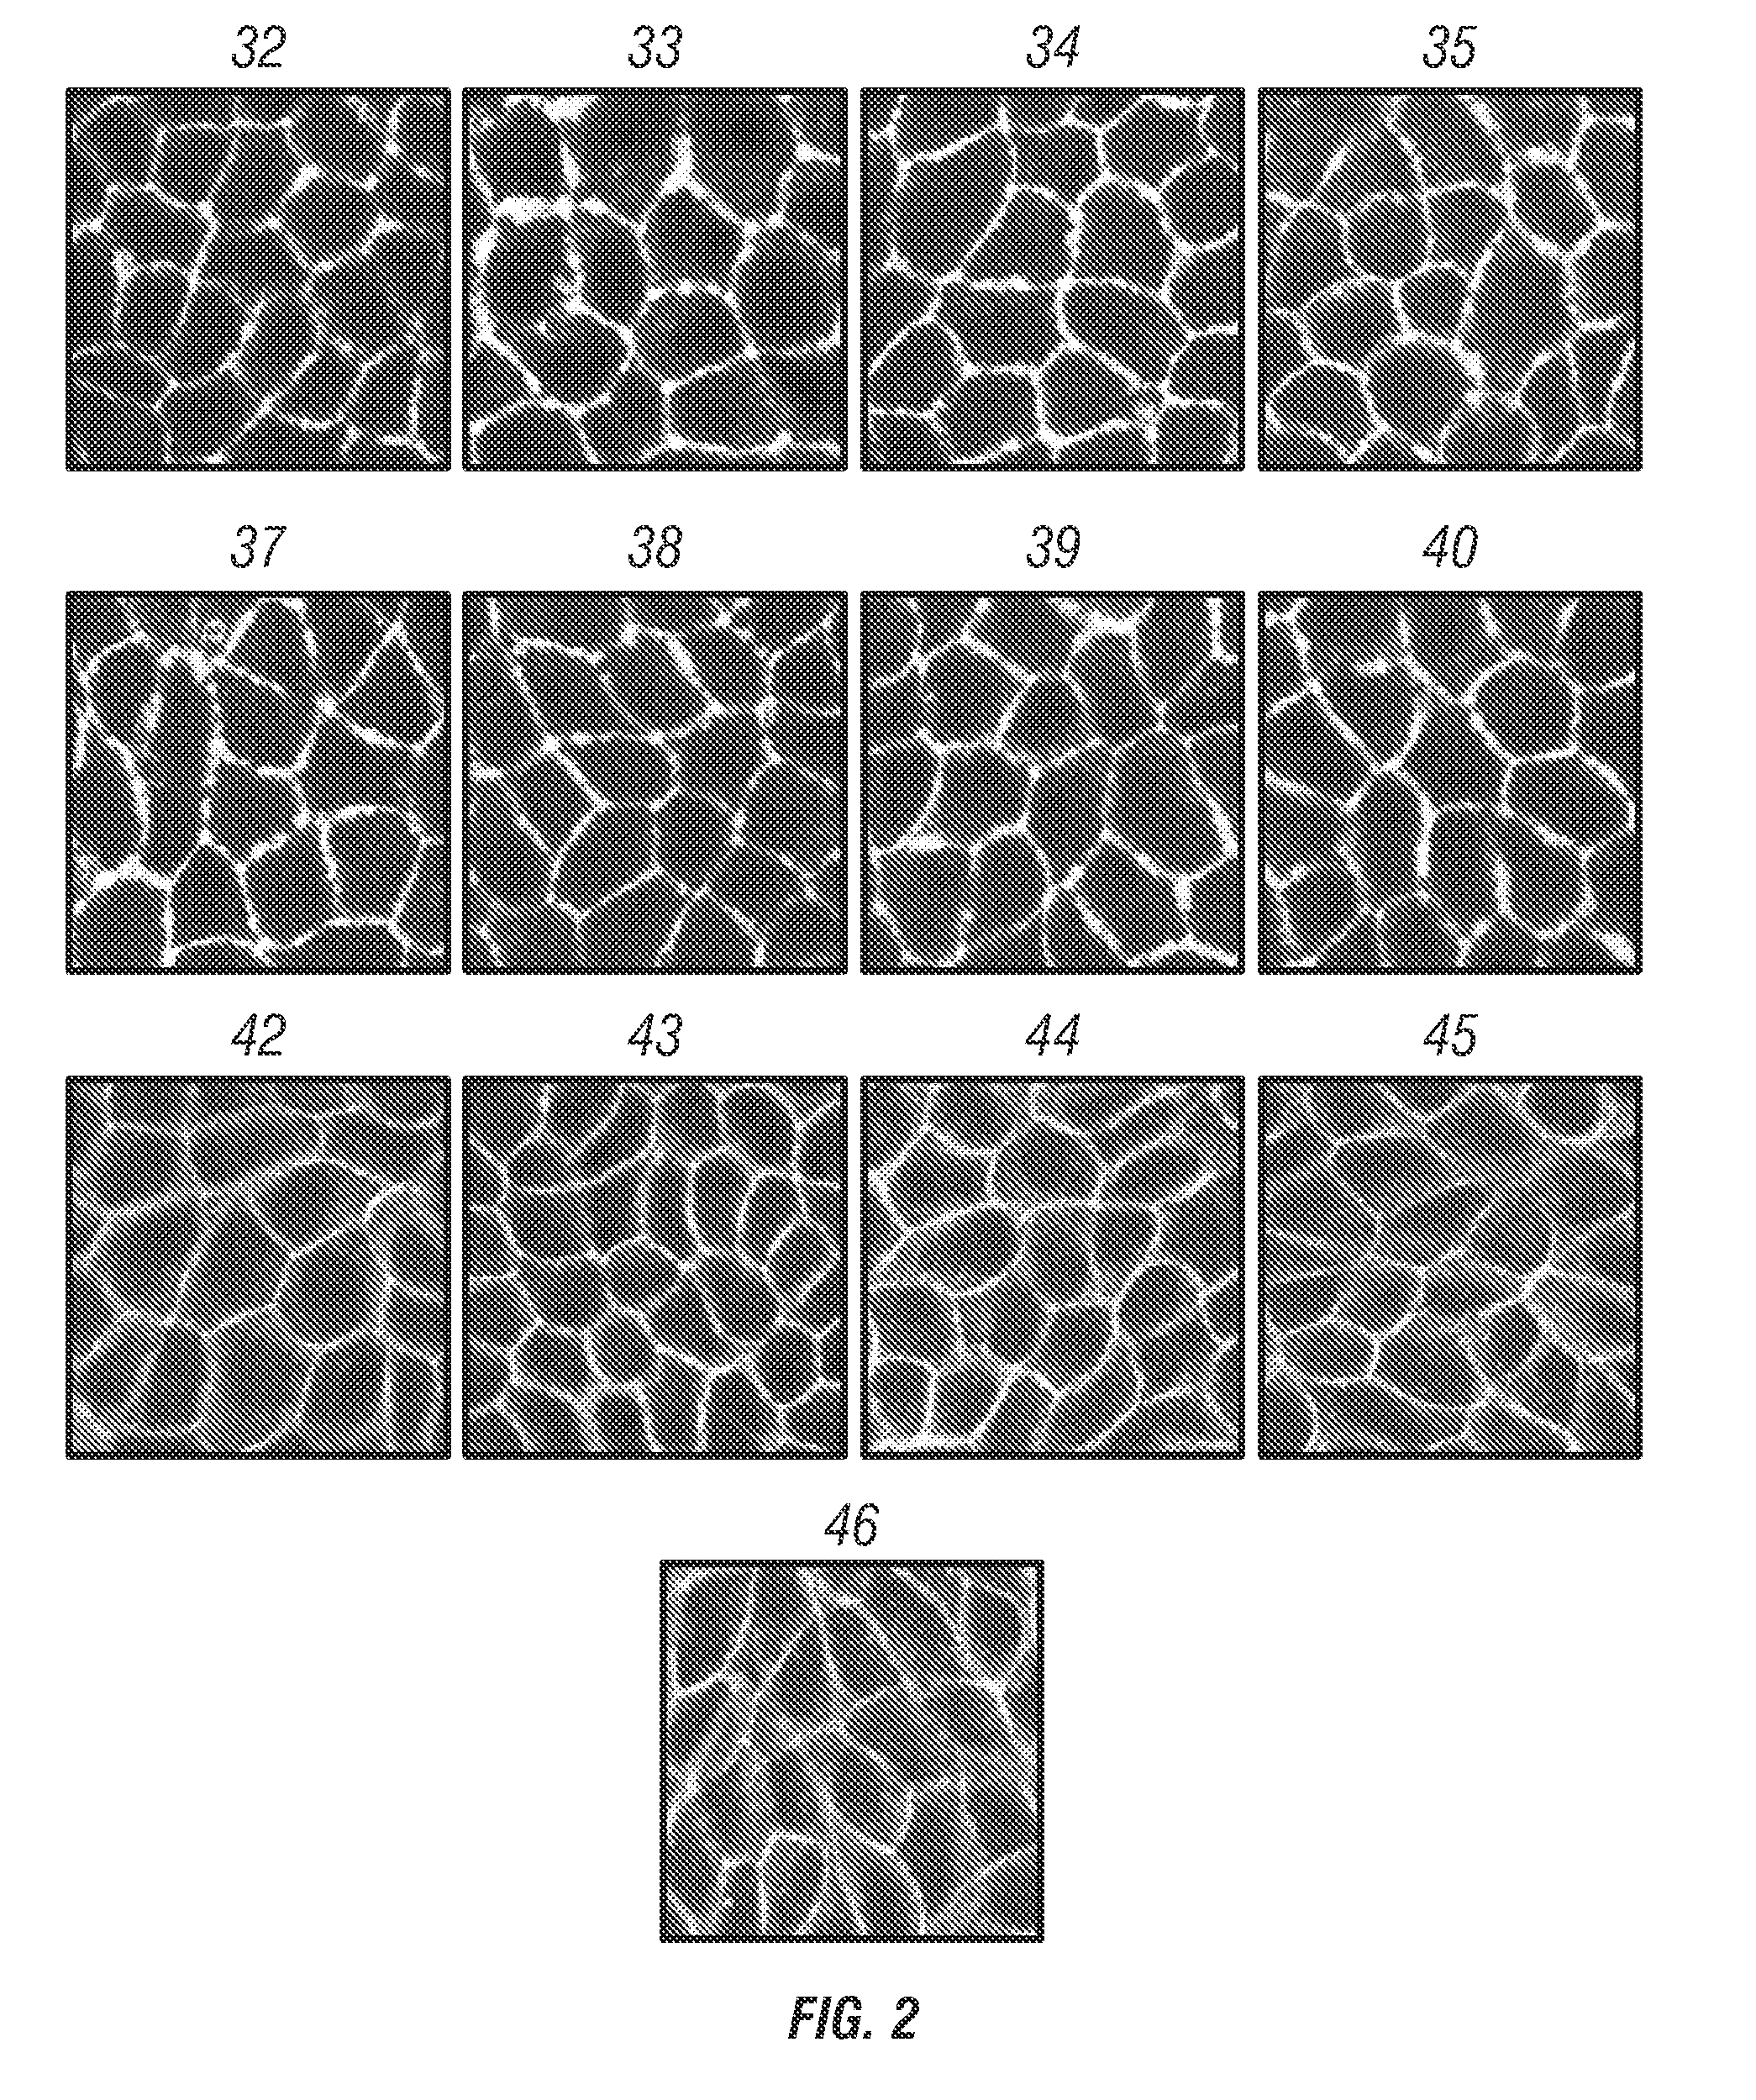 Fendiline derivatives and methods of use thereof